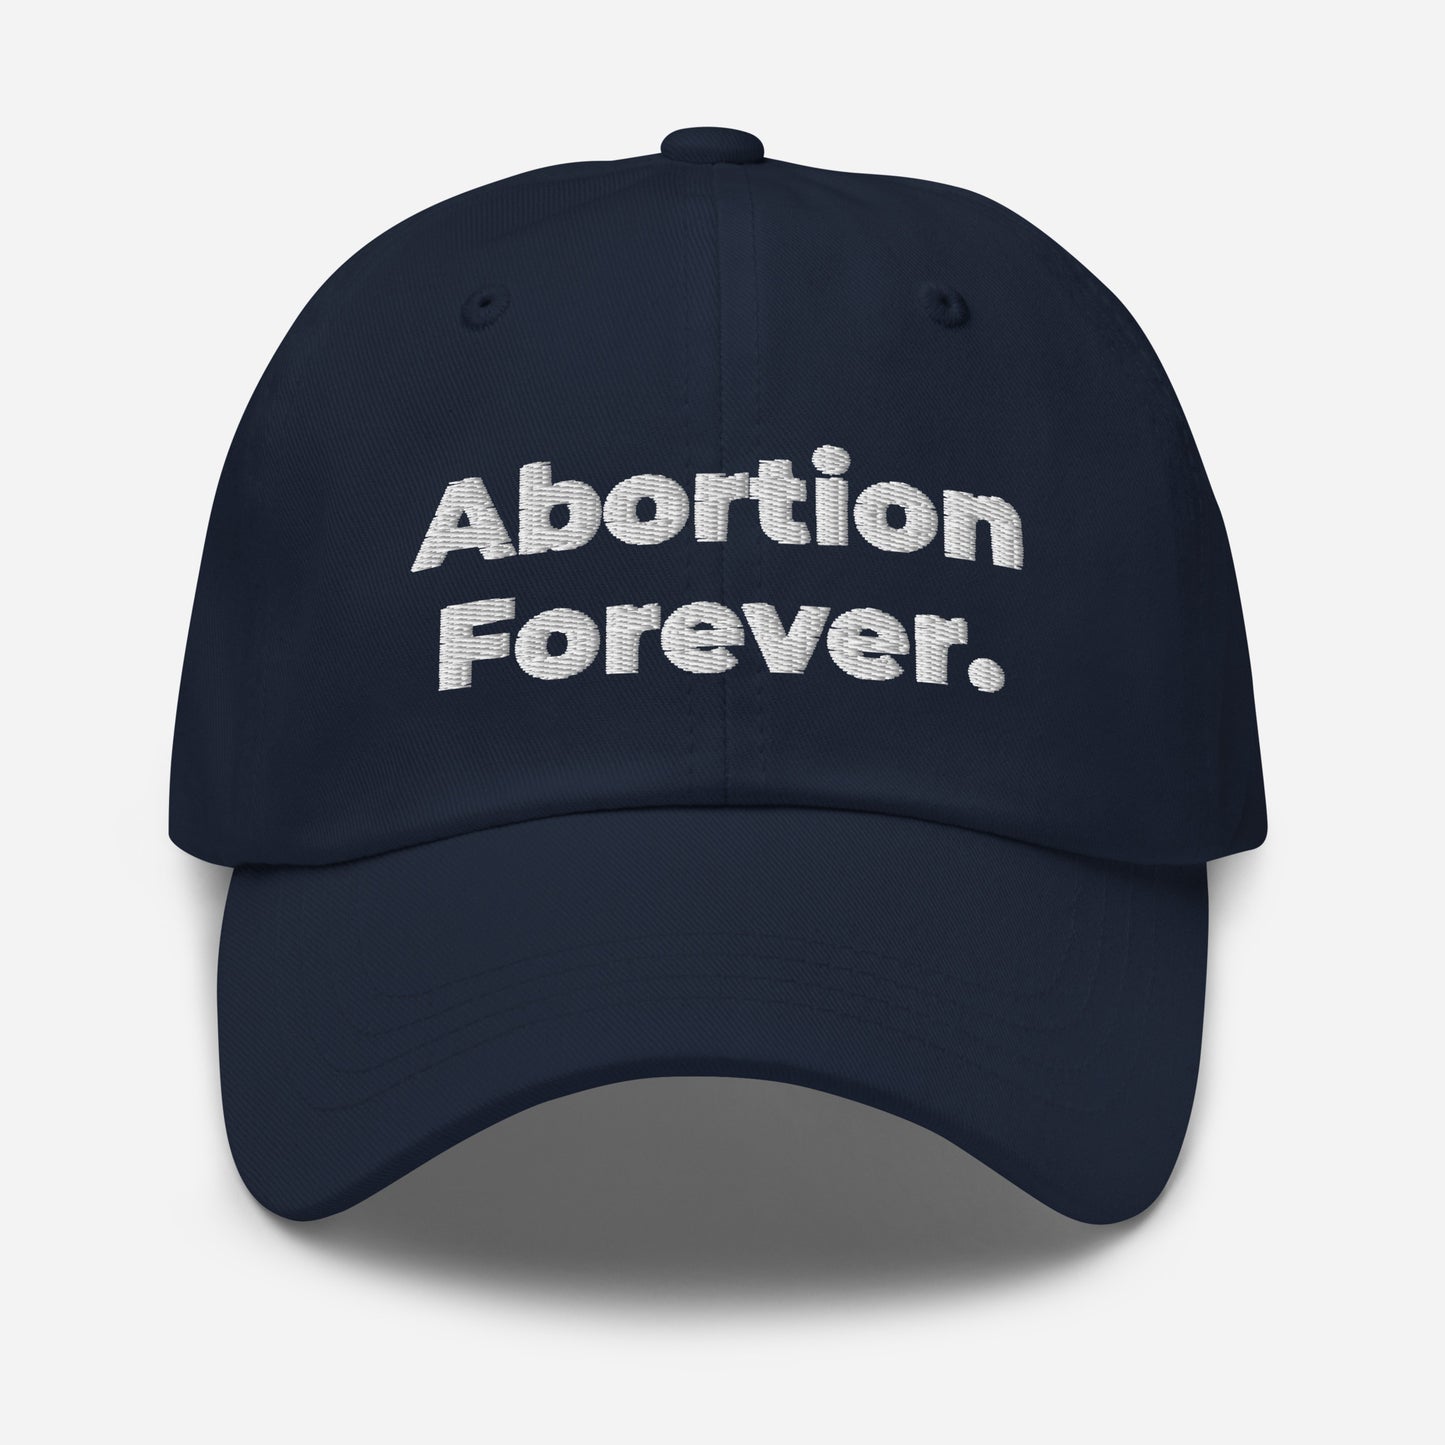 Abortion Forever hat